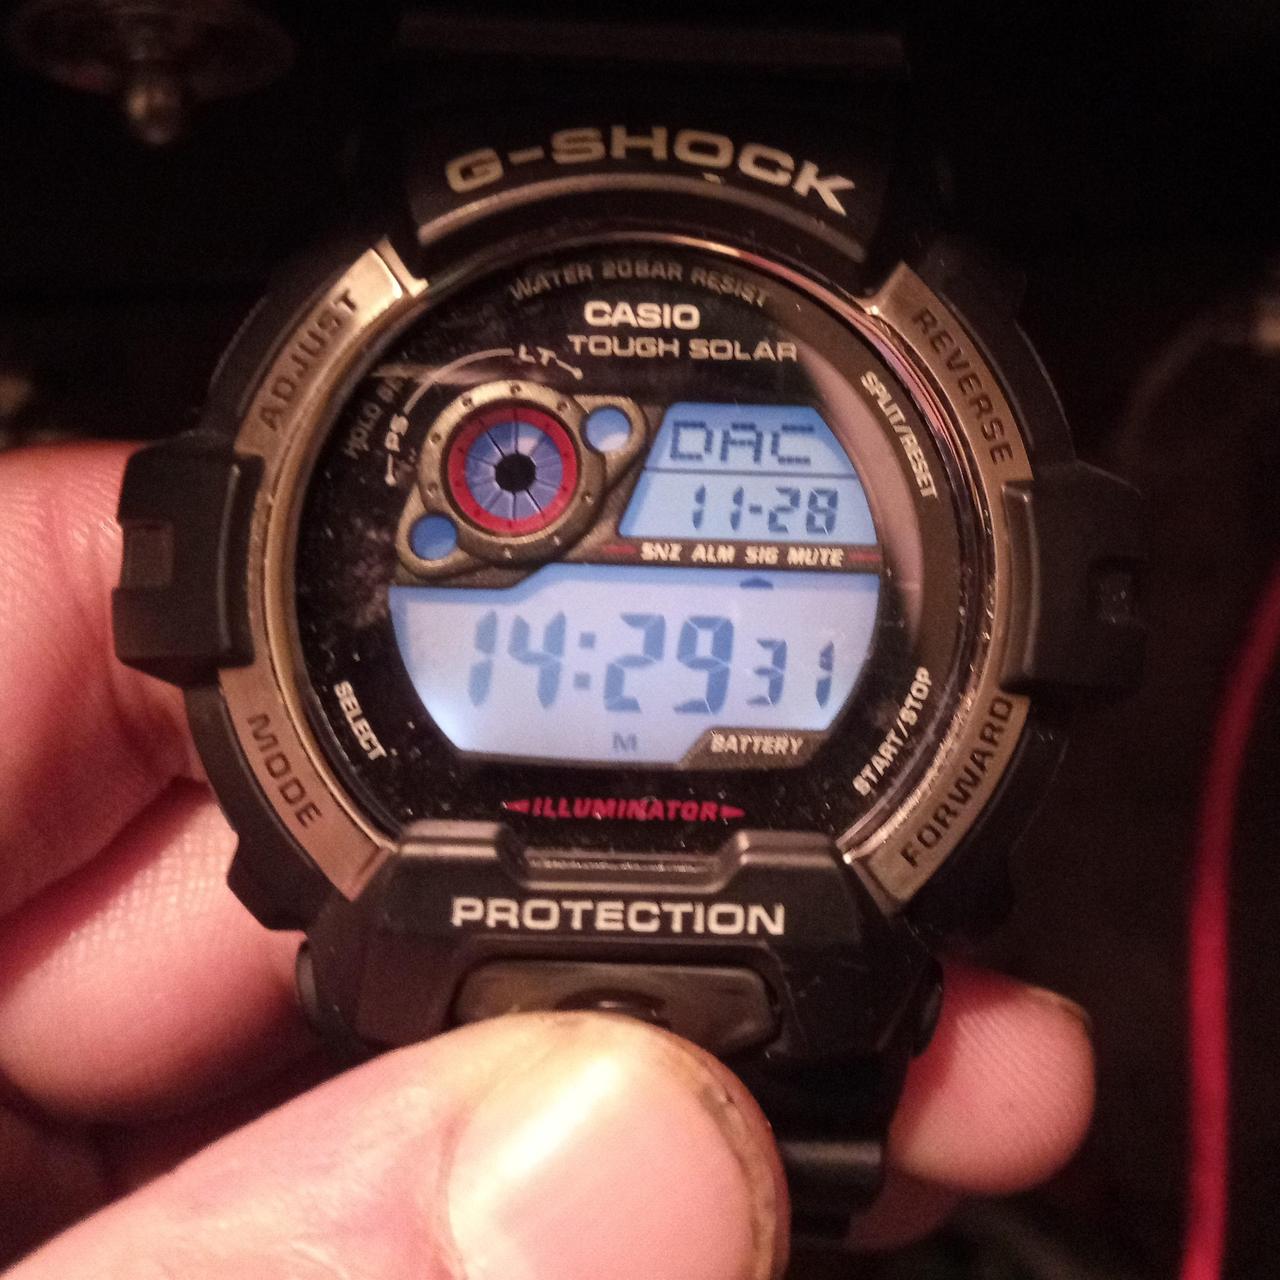 Product Image 1 - G-Shock TOUGH SOLAR watch
10/10 condition
Nothing